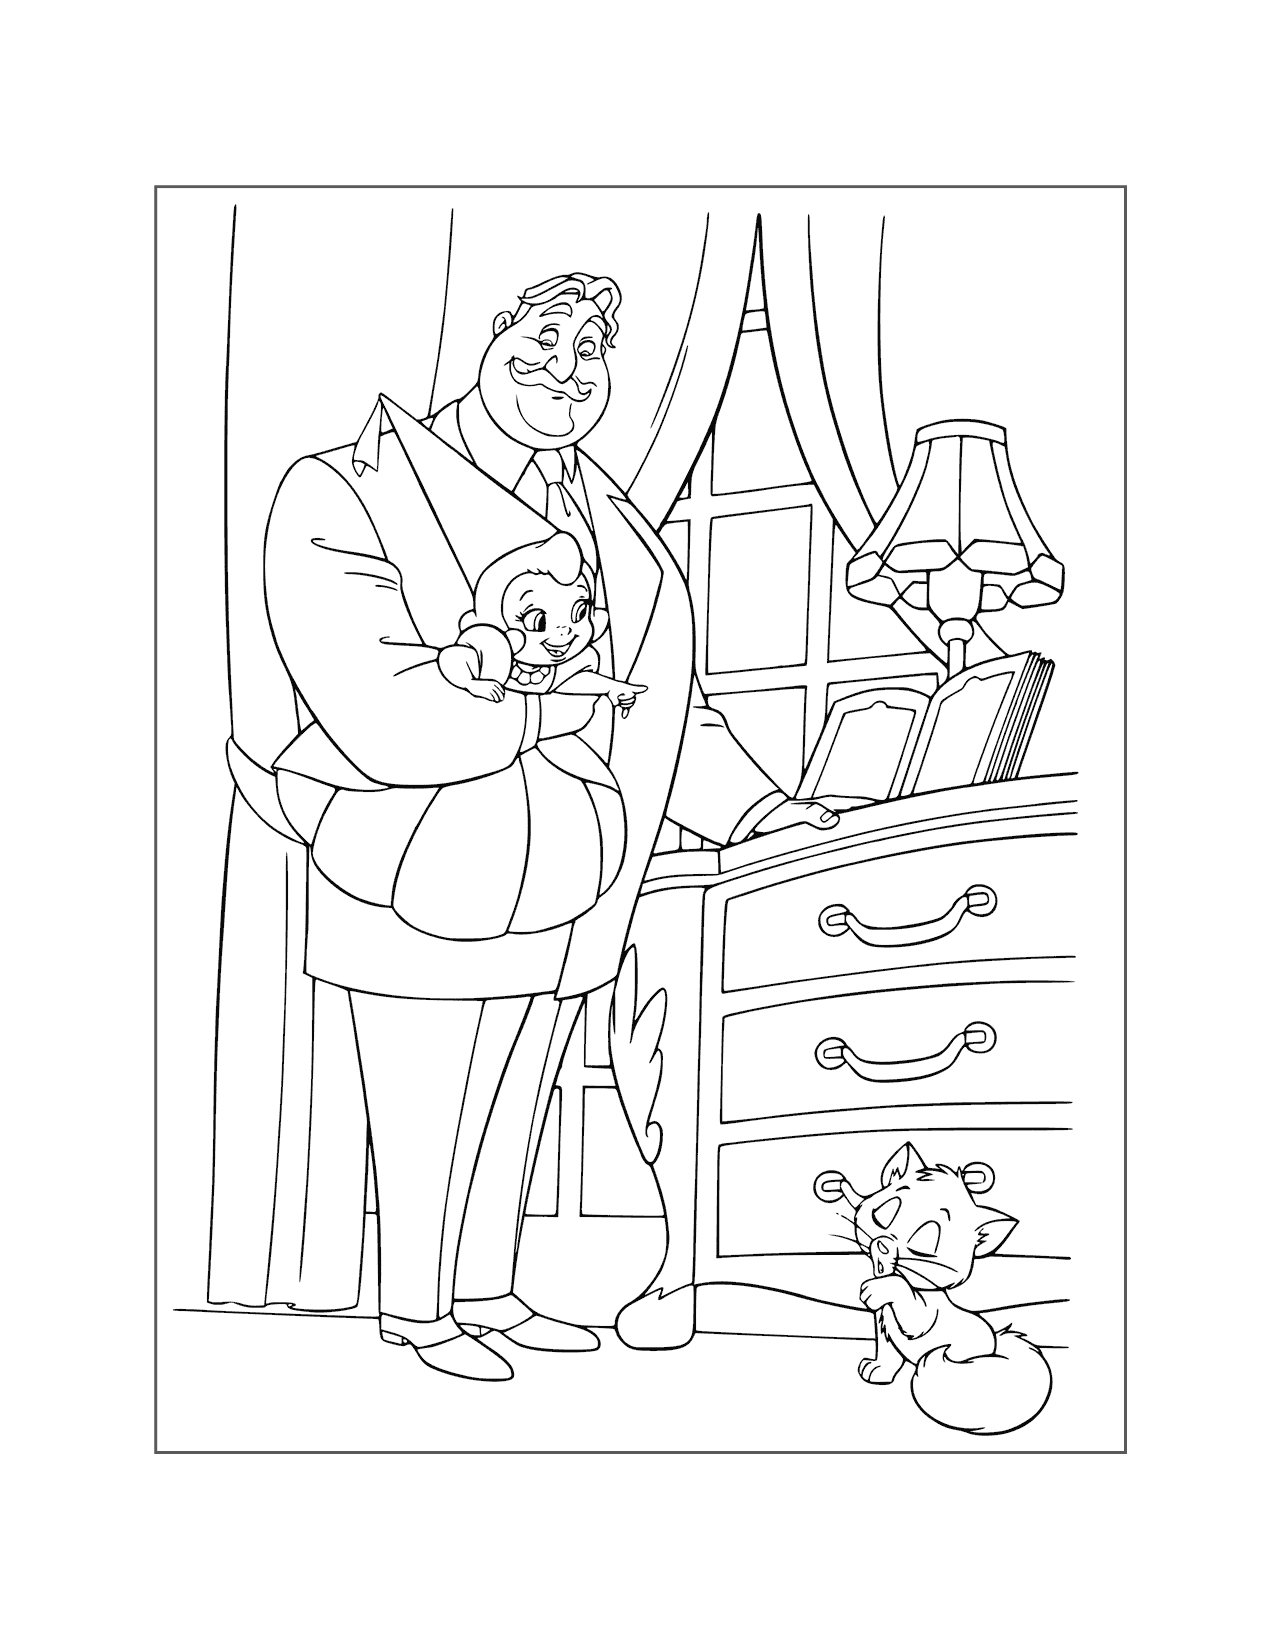 Charlotte And Her Father Princess And The Frog Coloring Page